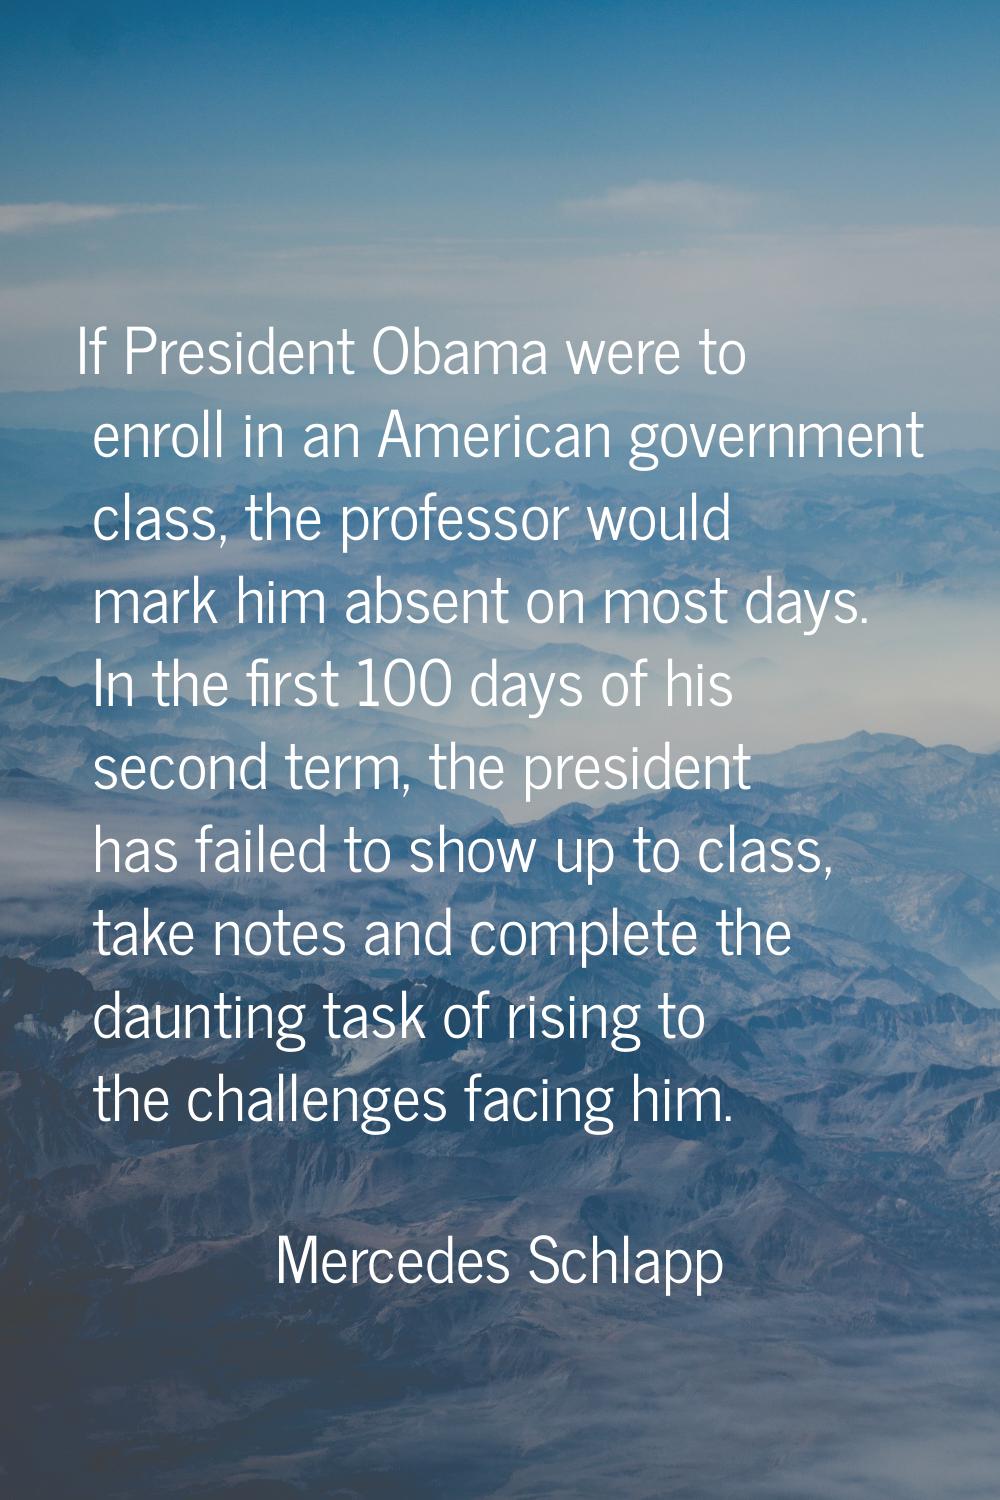 If President Obama were to enroll in an American government class, the professor would mark him abs